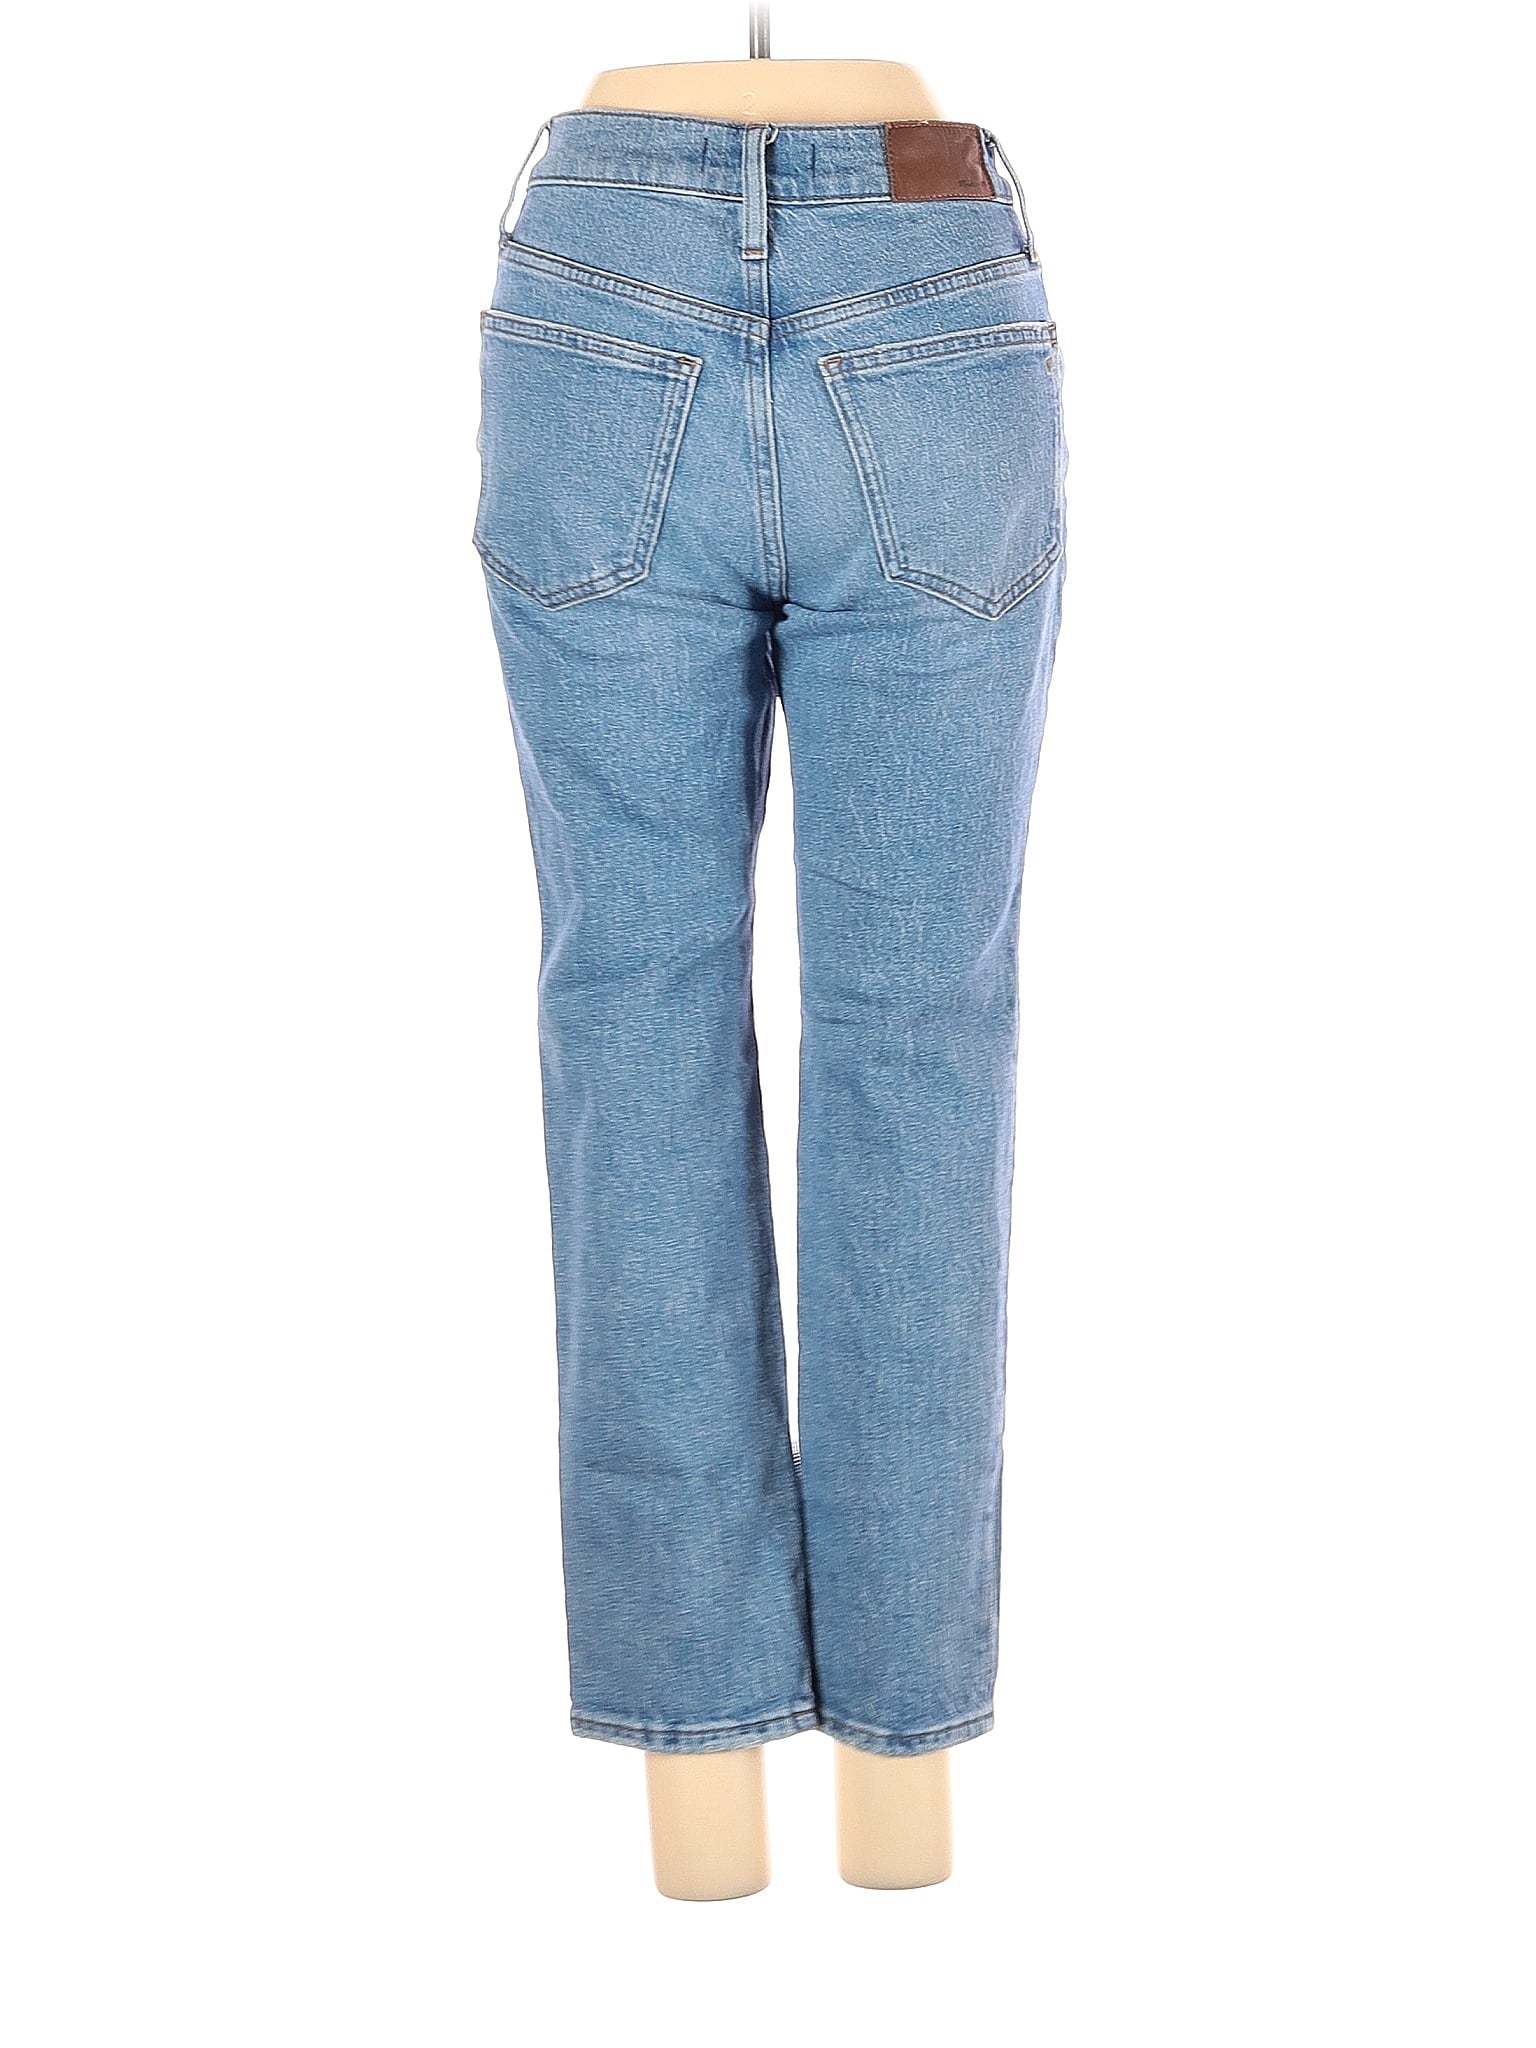 Mid-Rise Boyjeans Jeans in Medium Wash waist size - 24 P